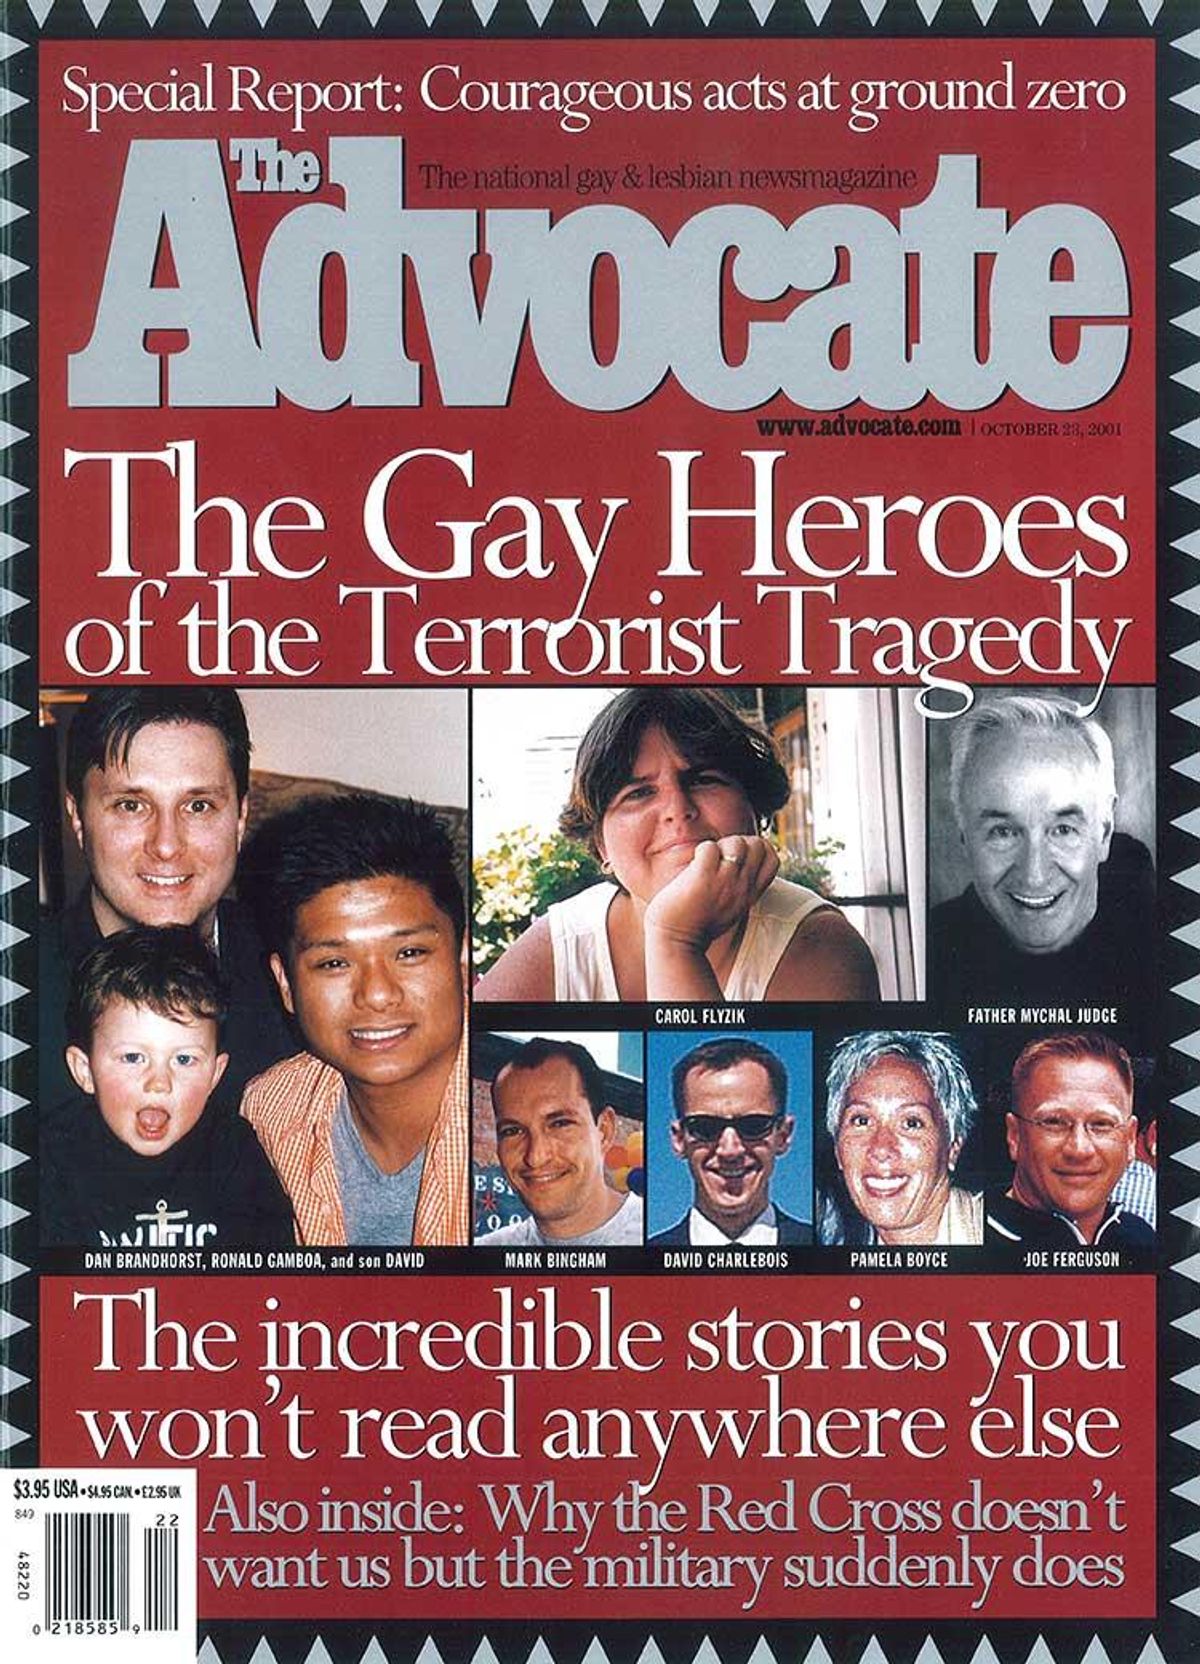 The Advocate September 11 2001 9/11 Cover The Gay Heroes of the Terrorist Tragedy